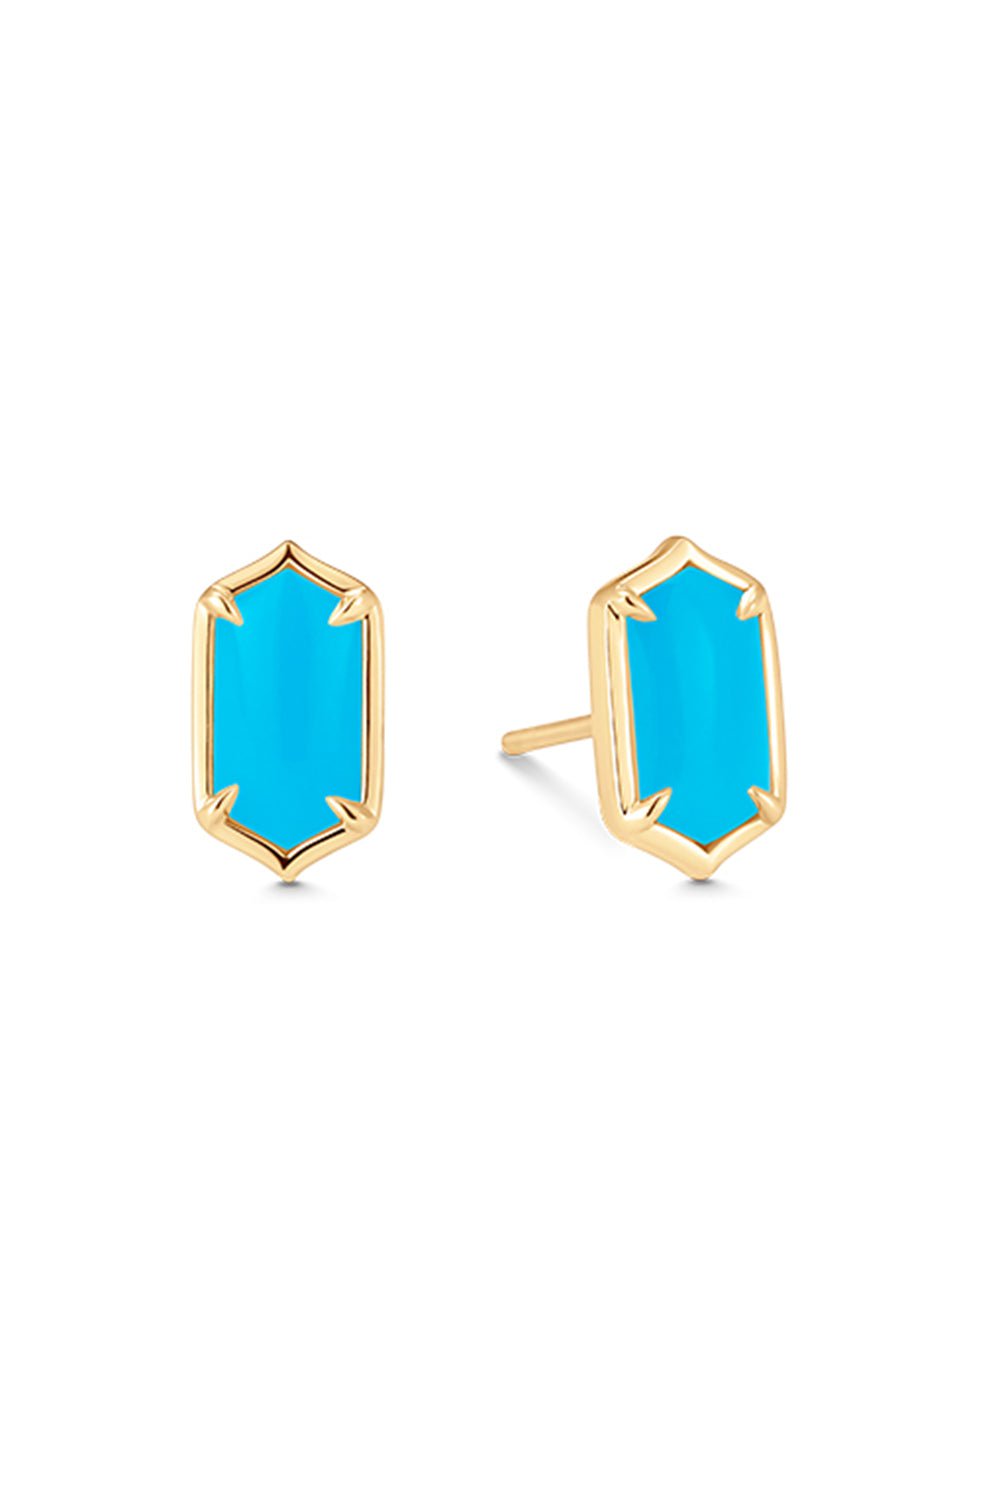 SARA WEINSTOCK-Lucia Elongated Turquoise Stud Earrings-YELLOW GOLD